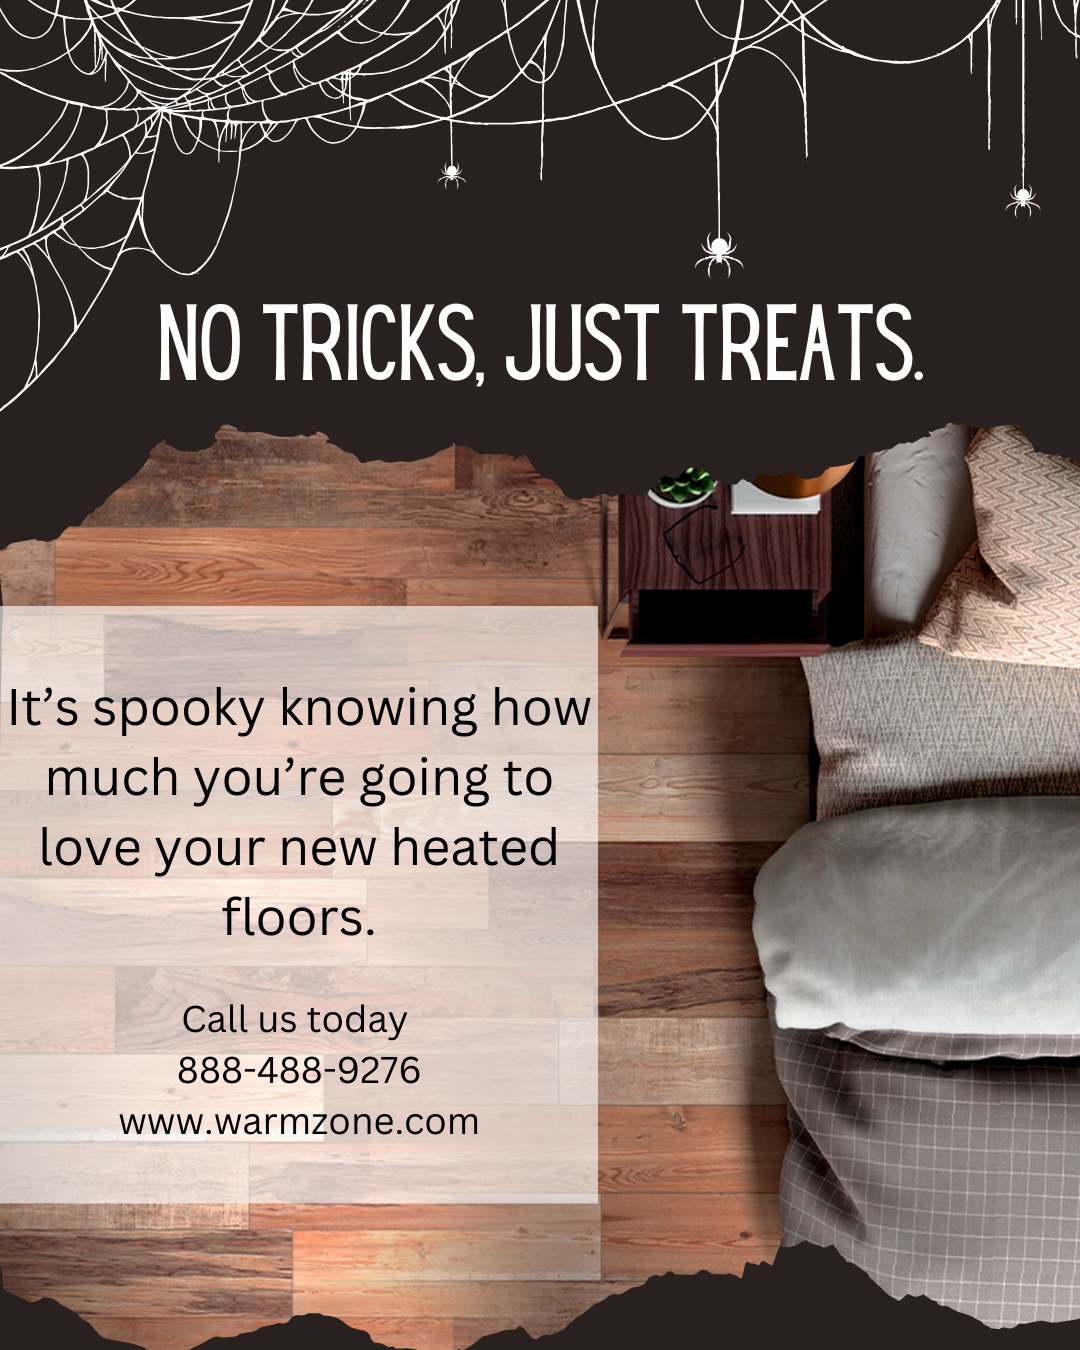 Trick or treat, warm your feet - Pinterest image.